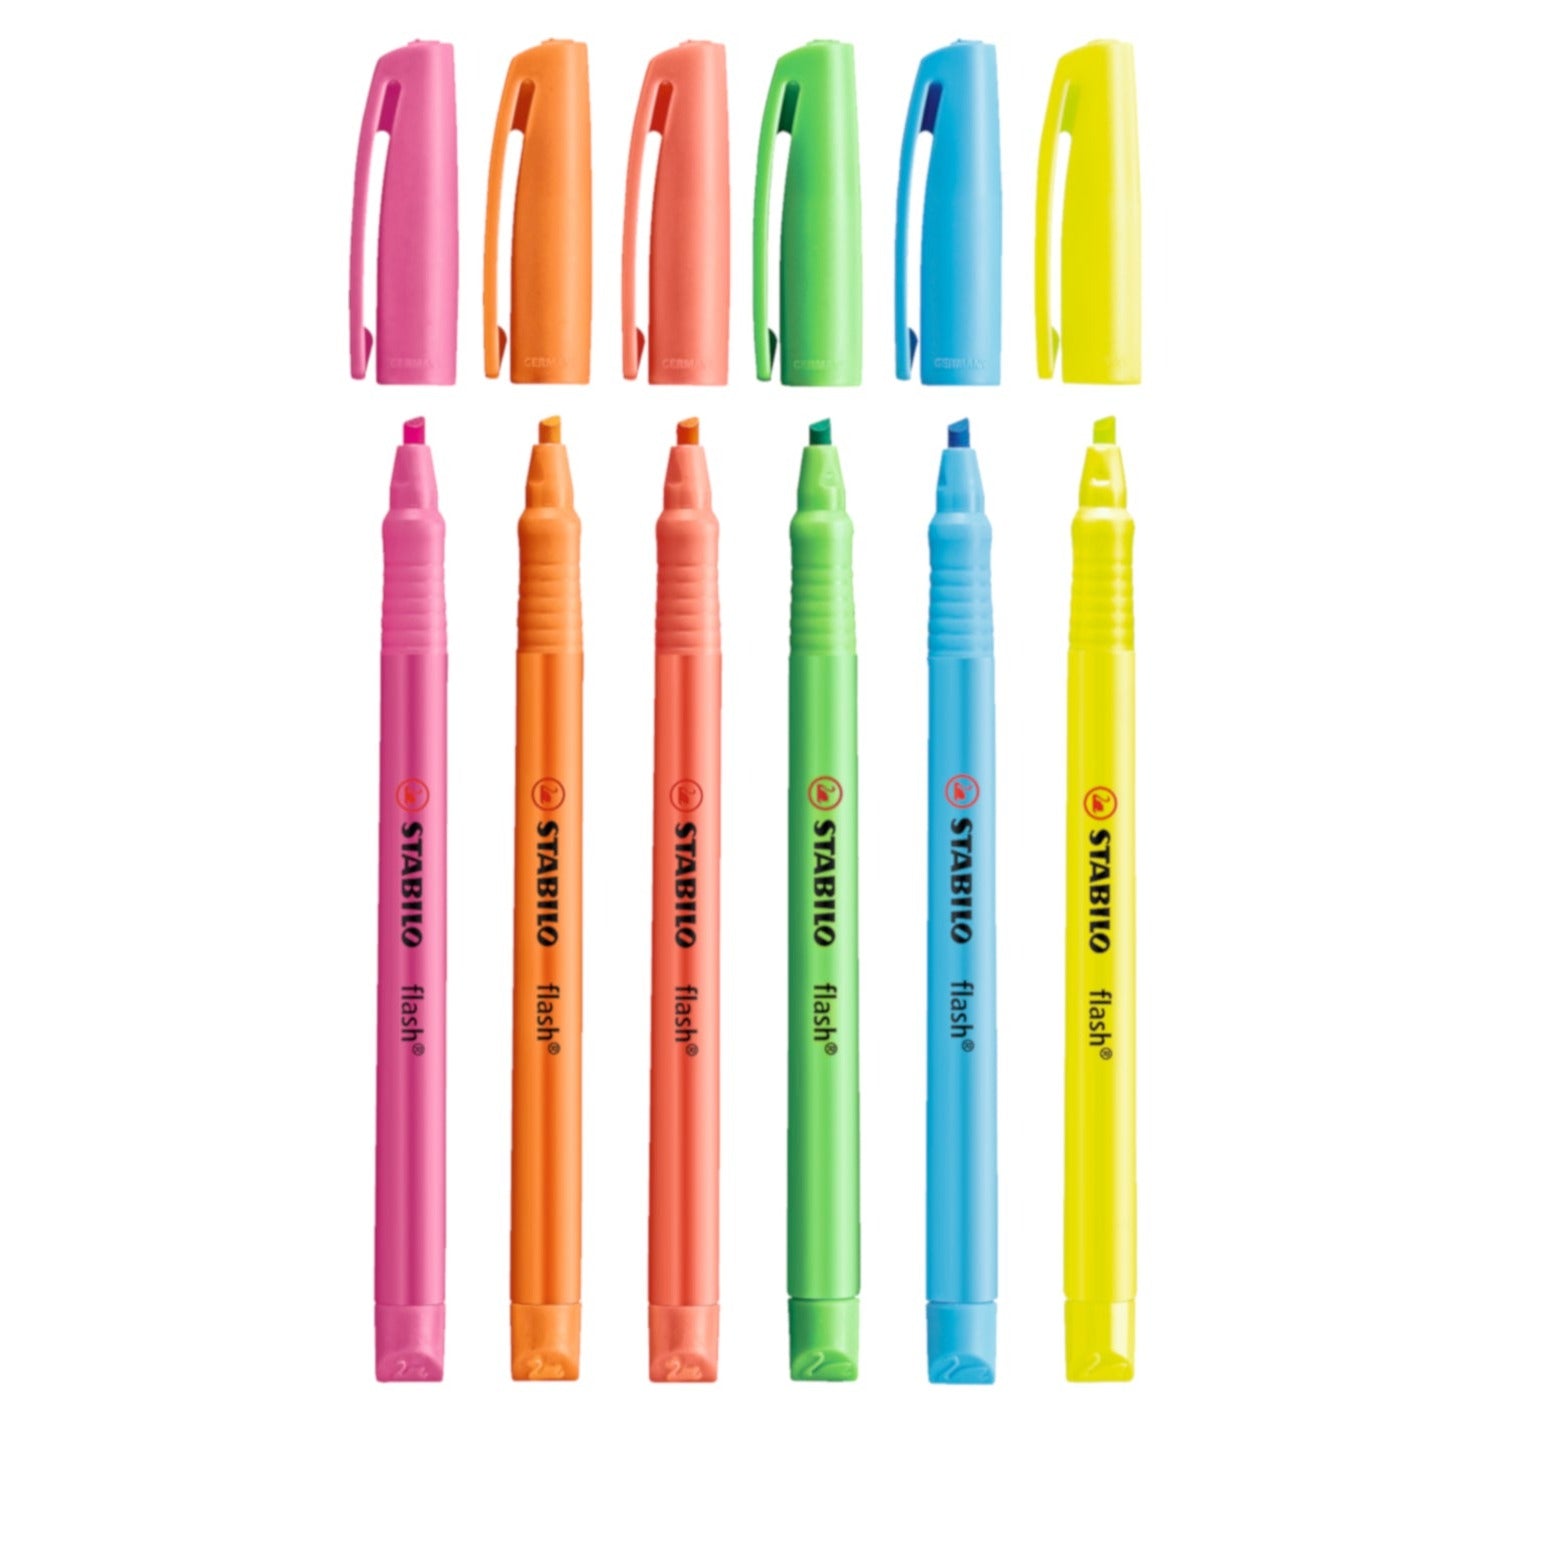 STABILO Flash Pen-style Highlighter with Musical Notes Design - Schwan-STABILO -Most colourful Stationery Shop